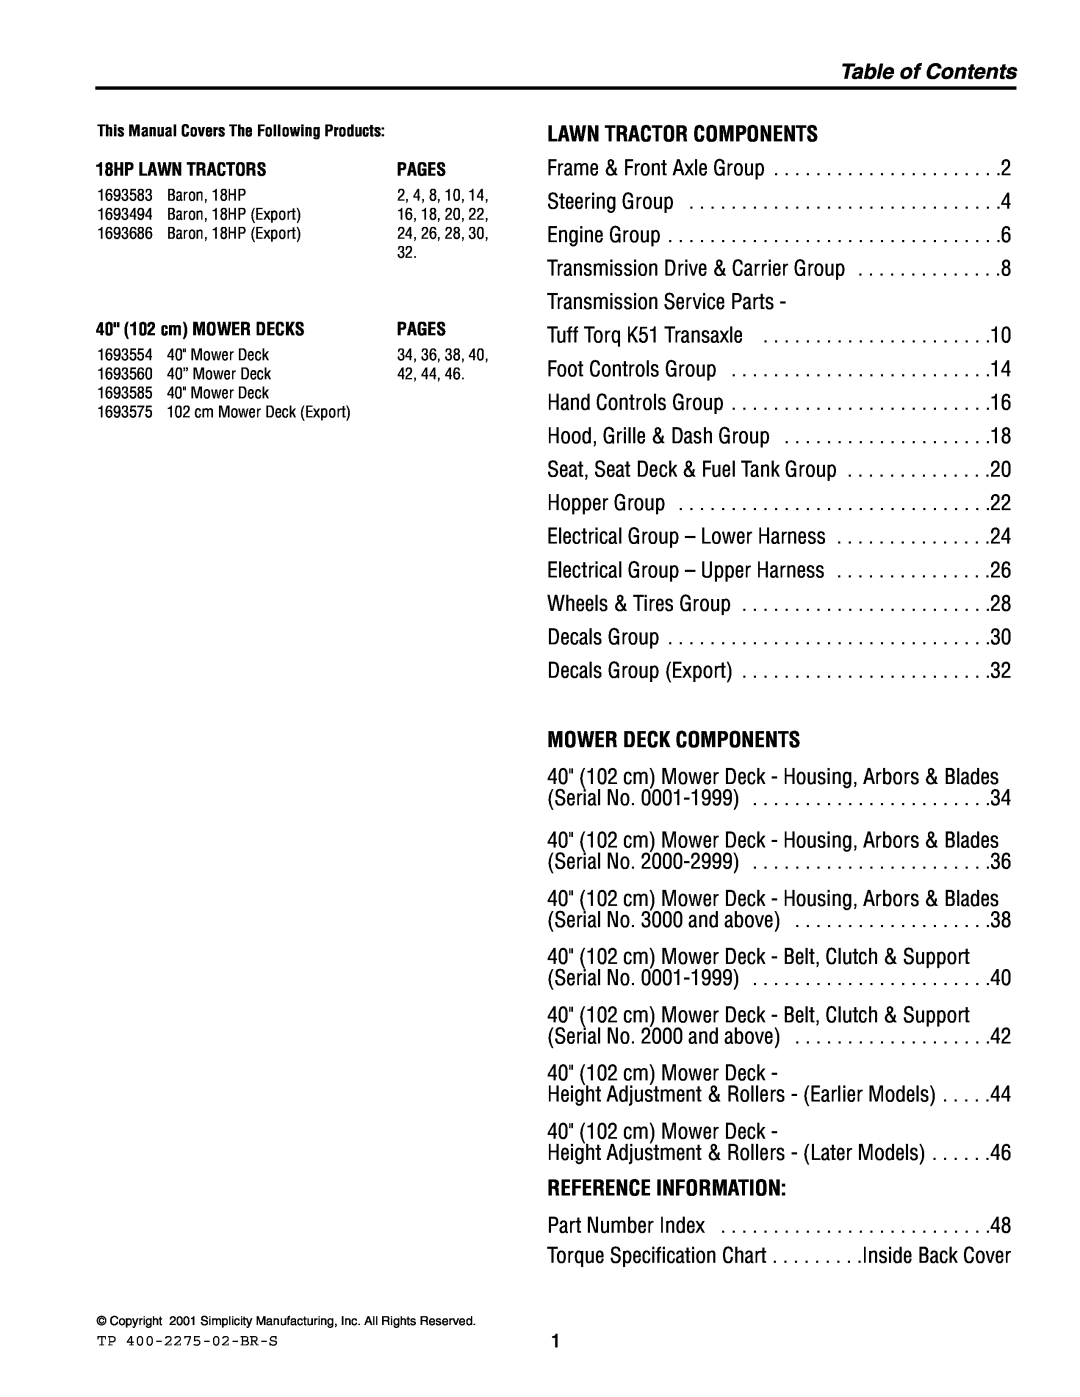 Massey Ferguson L&G 1693583 manual Table of Contents, Lawn Tractor Components, Mower Deck Components, Reference Information 